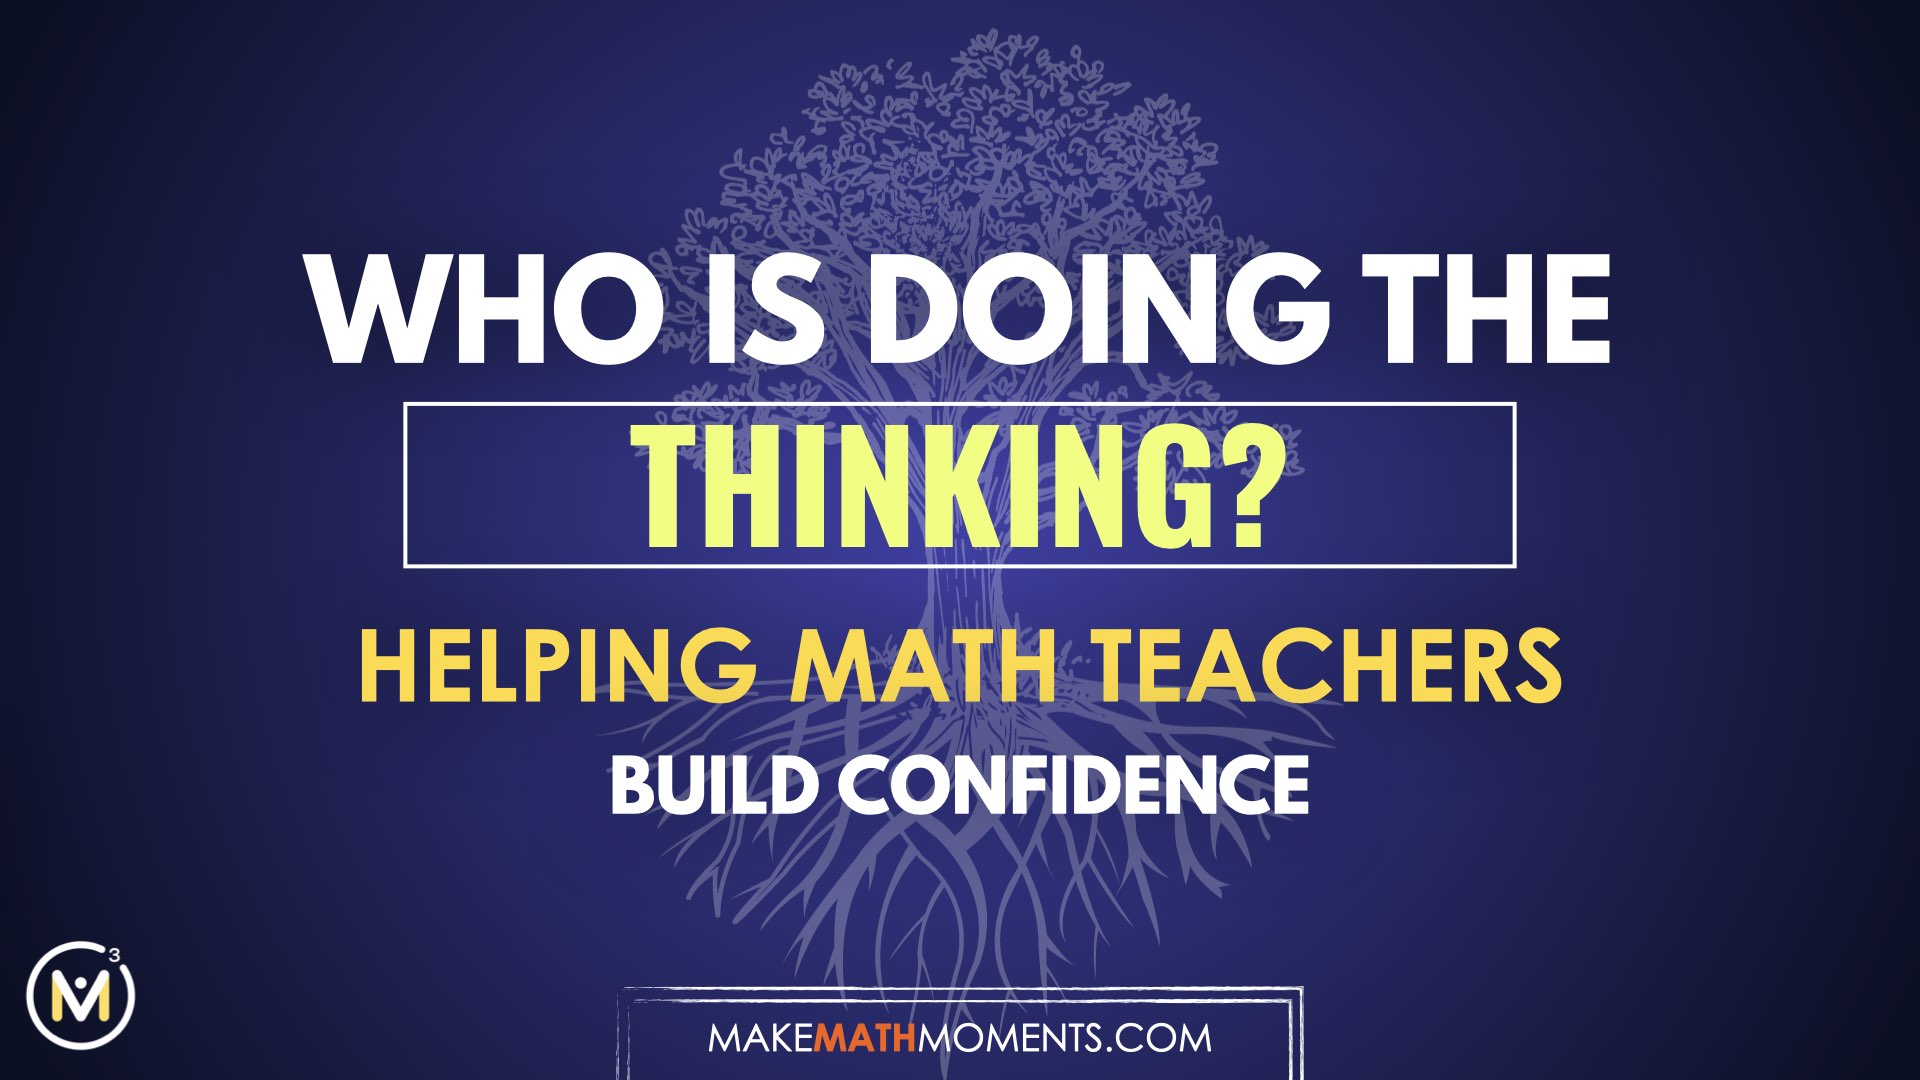 How Can We Get Math Teachers To Do The Right Kind Of Thinking?